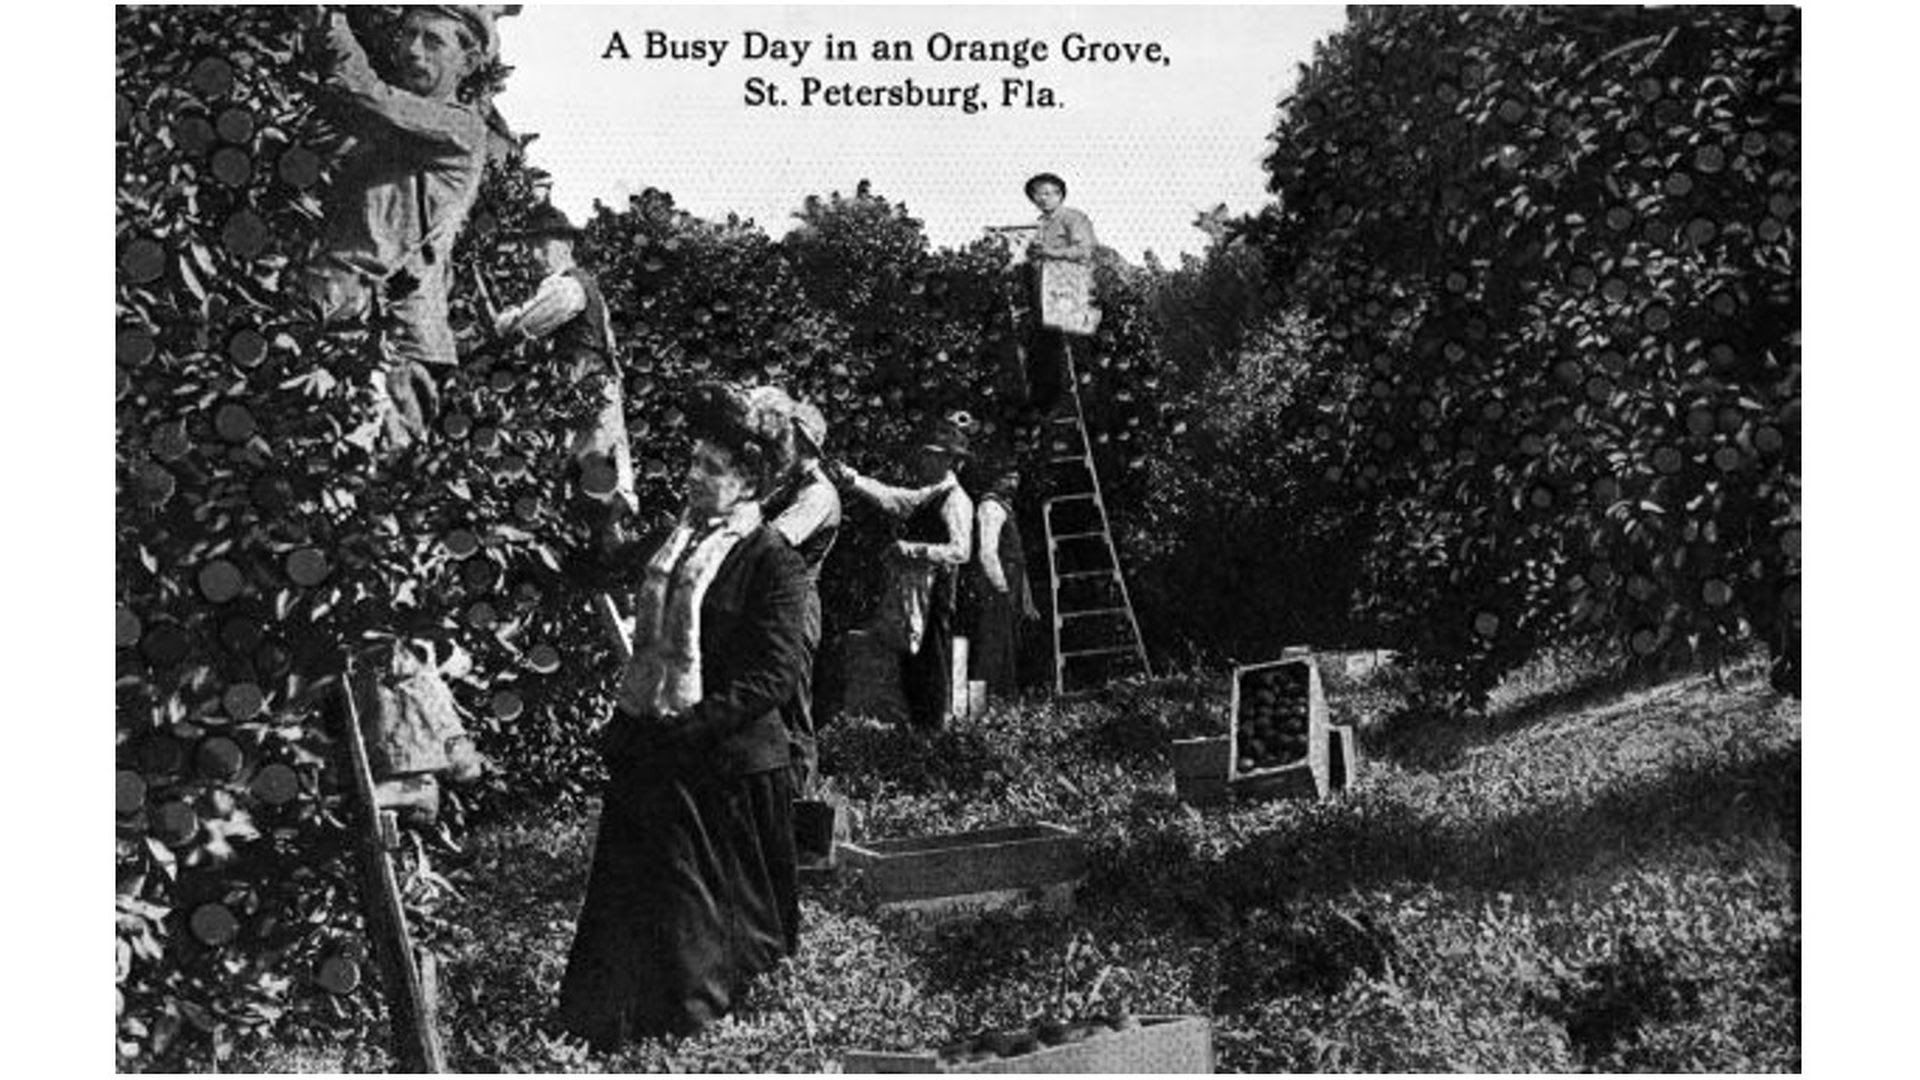 A photo negative of a postcard for St. Petersburg, Florida, with men and women picking oranges pictured.